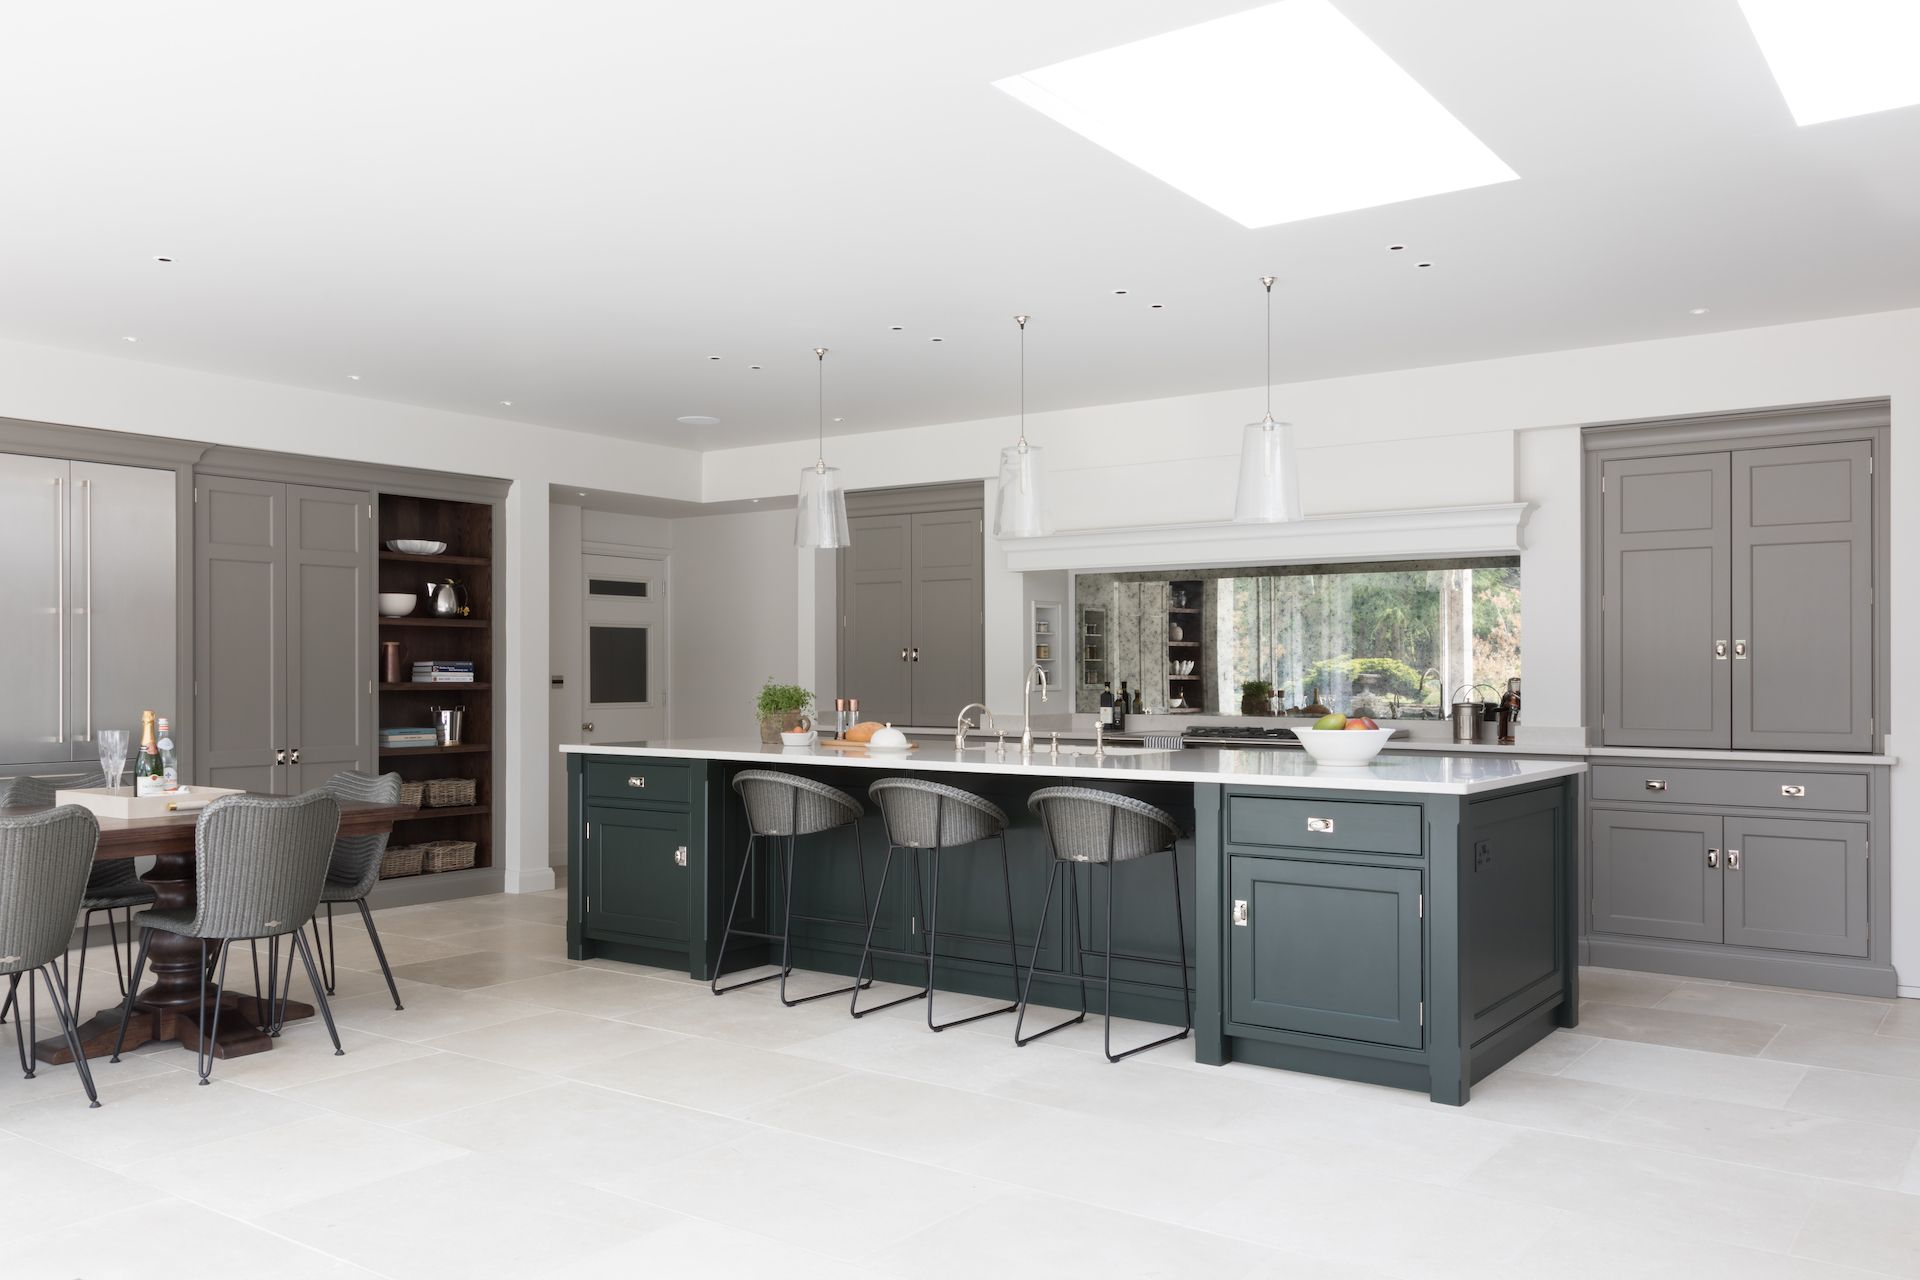 How To Plan Your Kitchen Project | Q&A With Creative Director Louisa Eggleston